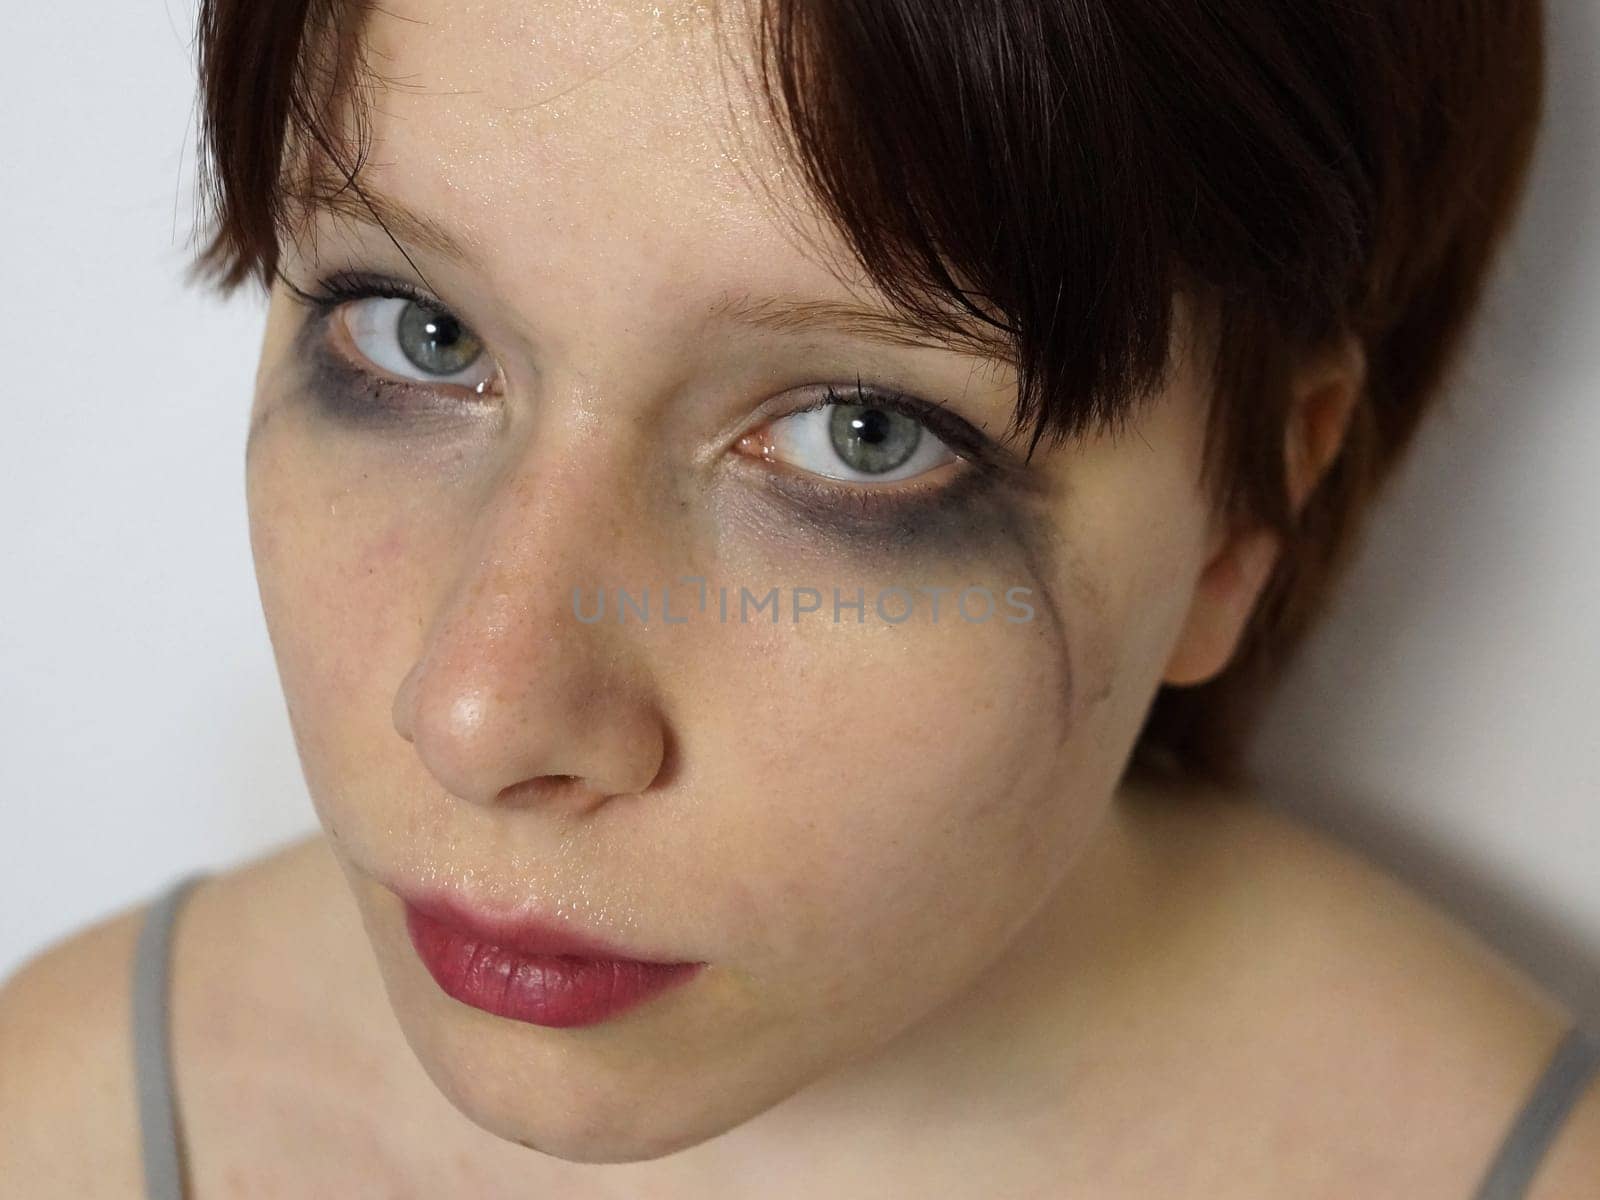 close-up portrait of a tear-stained teenage girl with mascara smeared eyes by Annado